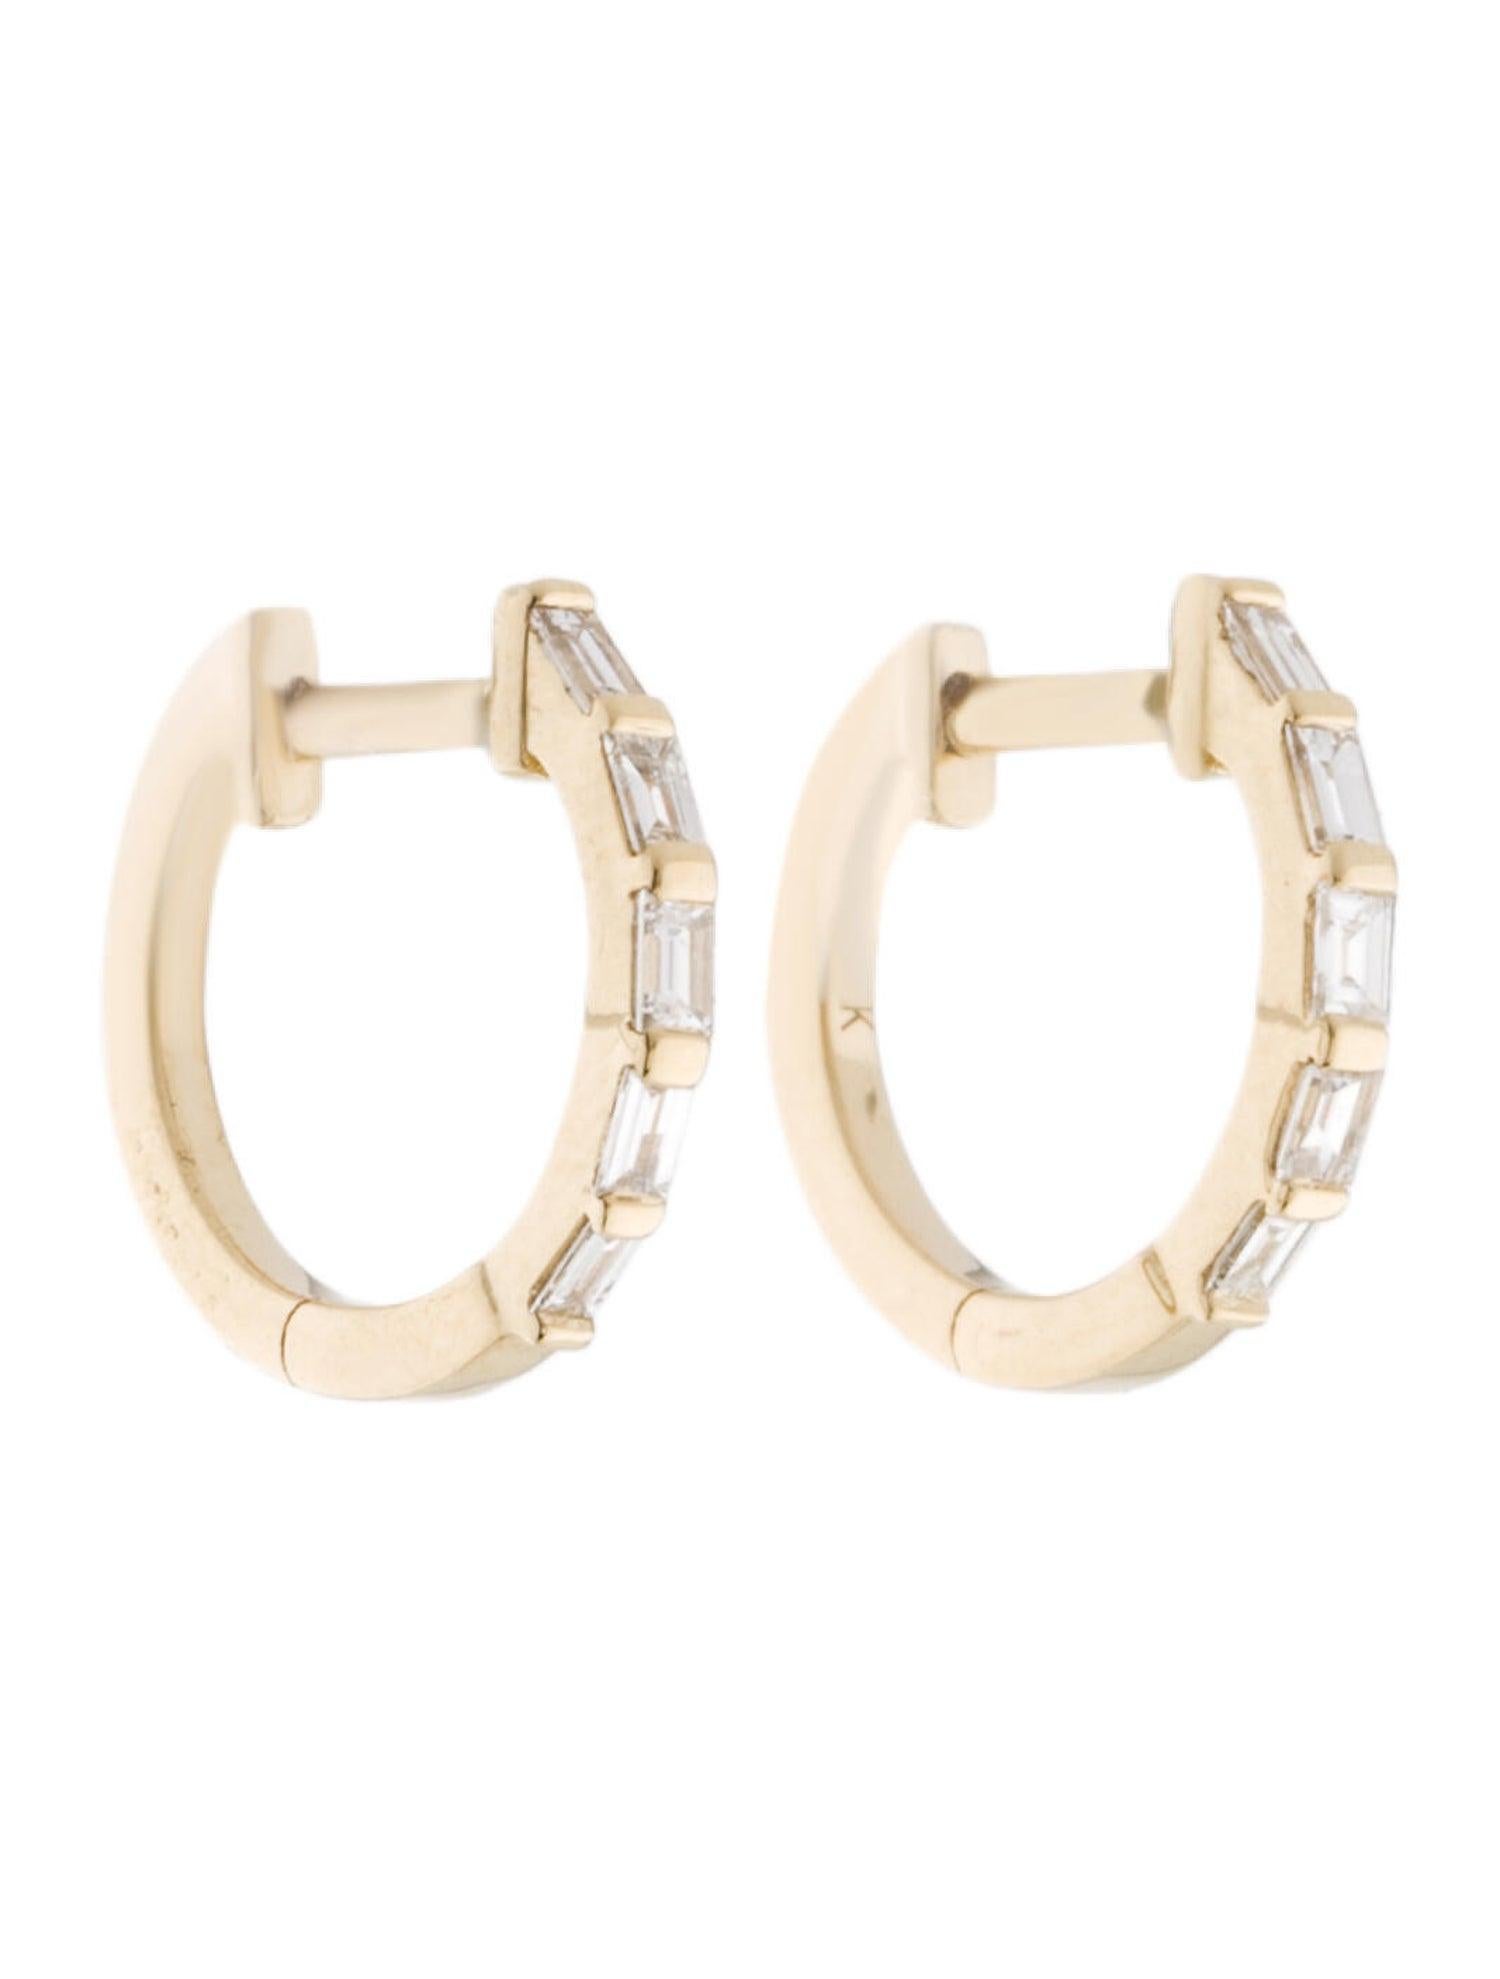 This pair of Diamond Baguette Huggie Hoop Earrings are sure to be your new favorite. With shimmering 0.25 ct. of baguette-cut diamonds adorning the Huggie, they create the perfect amount of sparkle for  any look. Crafted in 14k Gold with easy to use